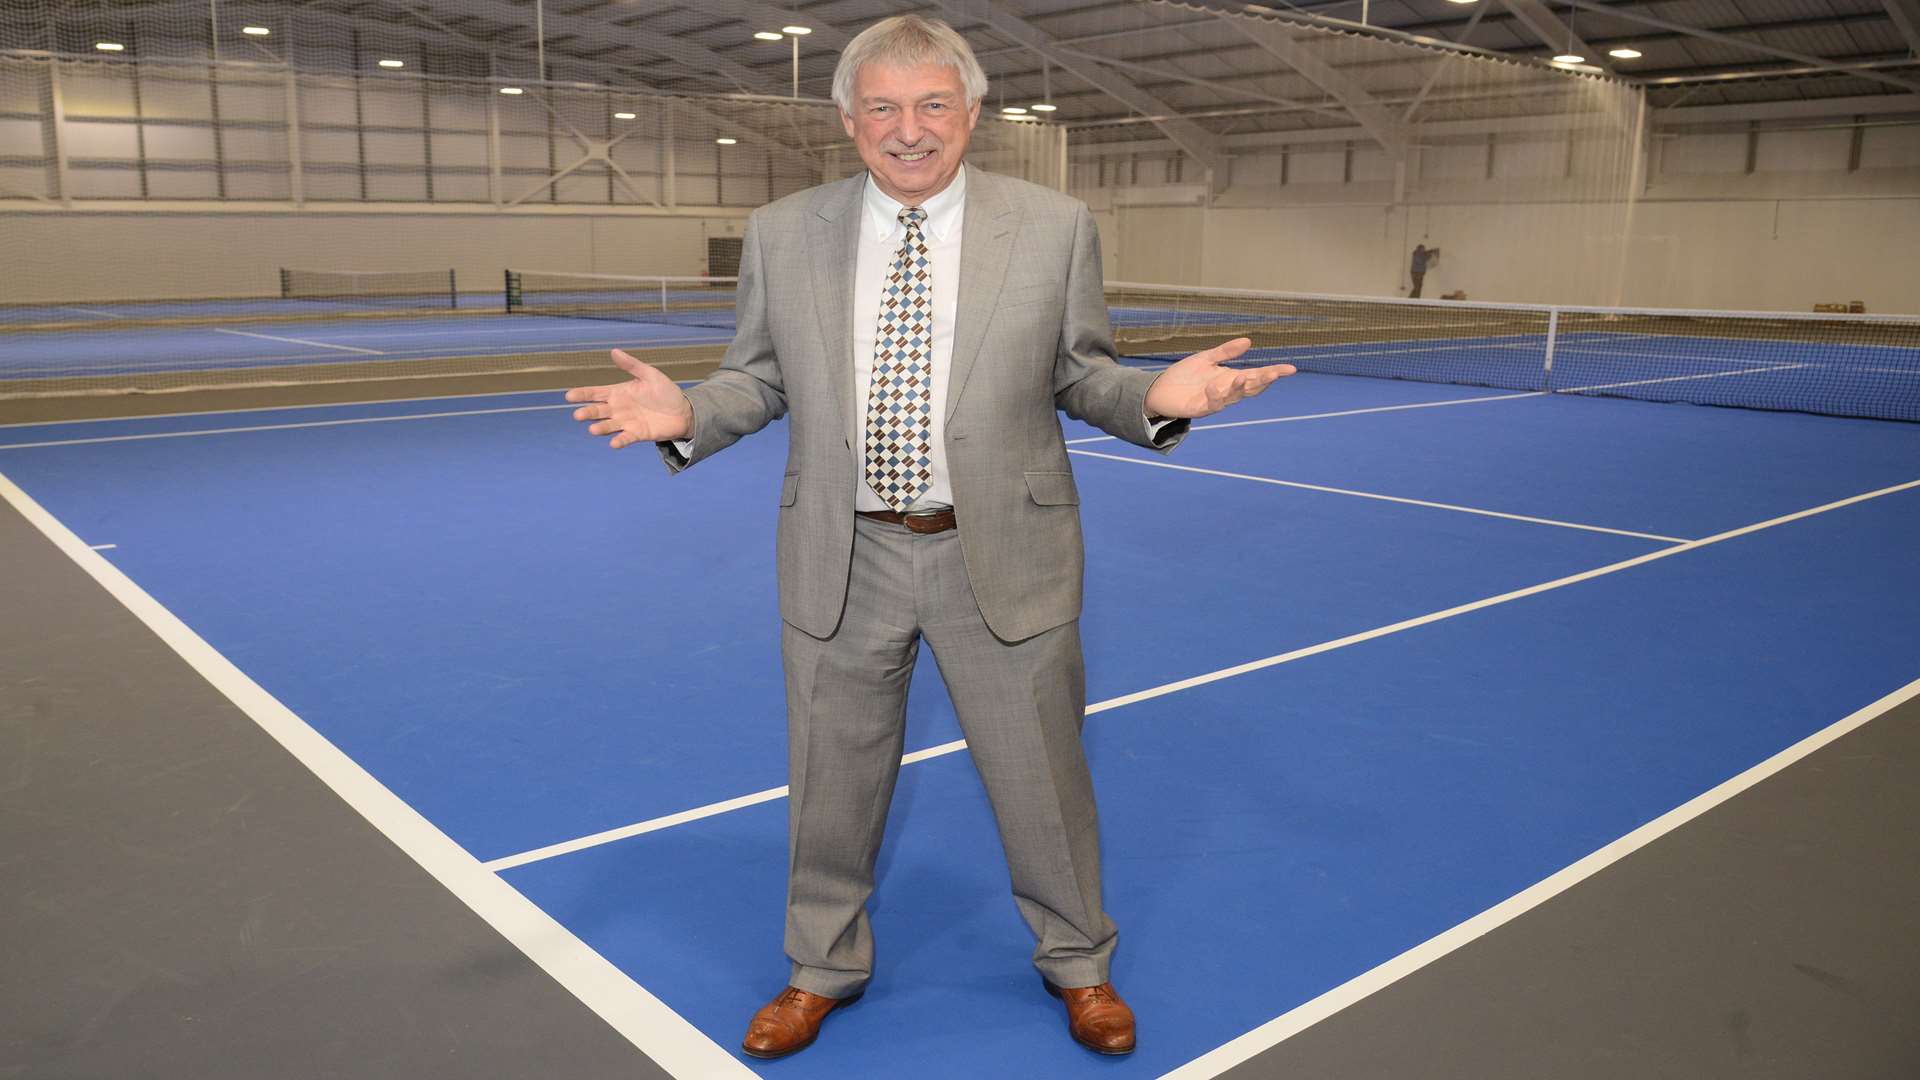 Colin Jarvis has turned the 44Two Sports and Social Club into a state-of-the-art tennis facility Picture: Gary Browne